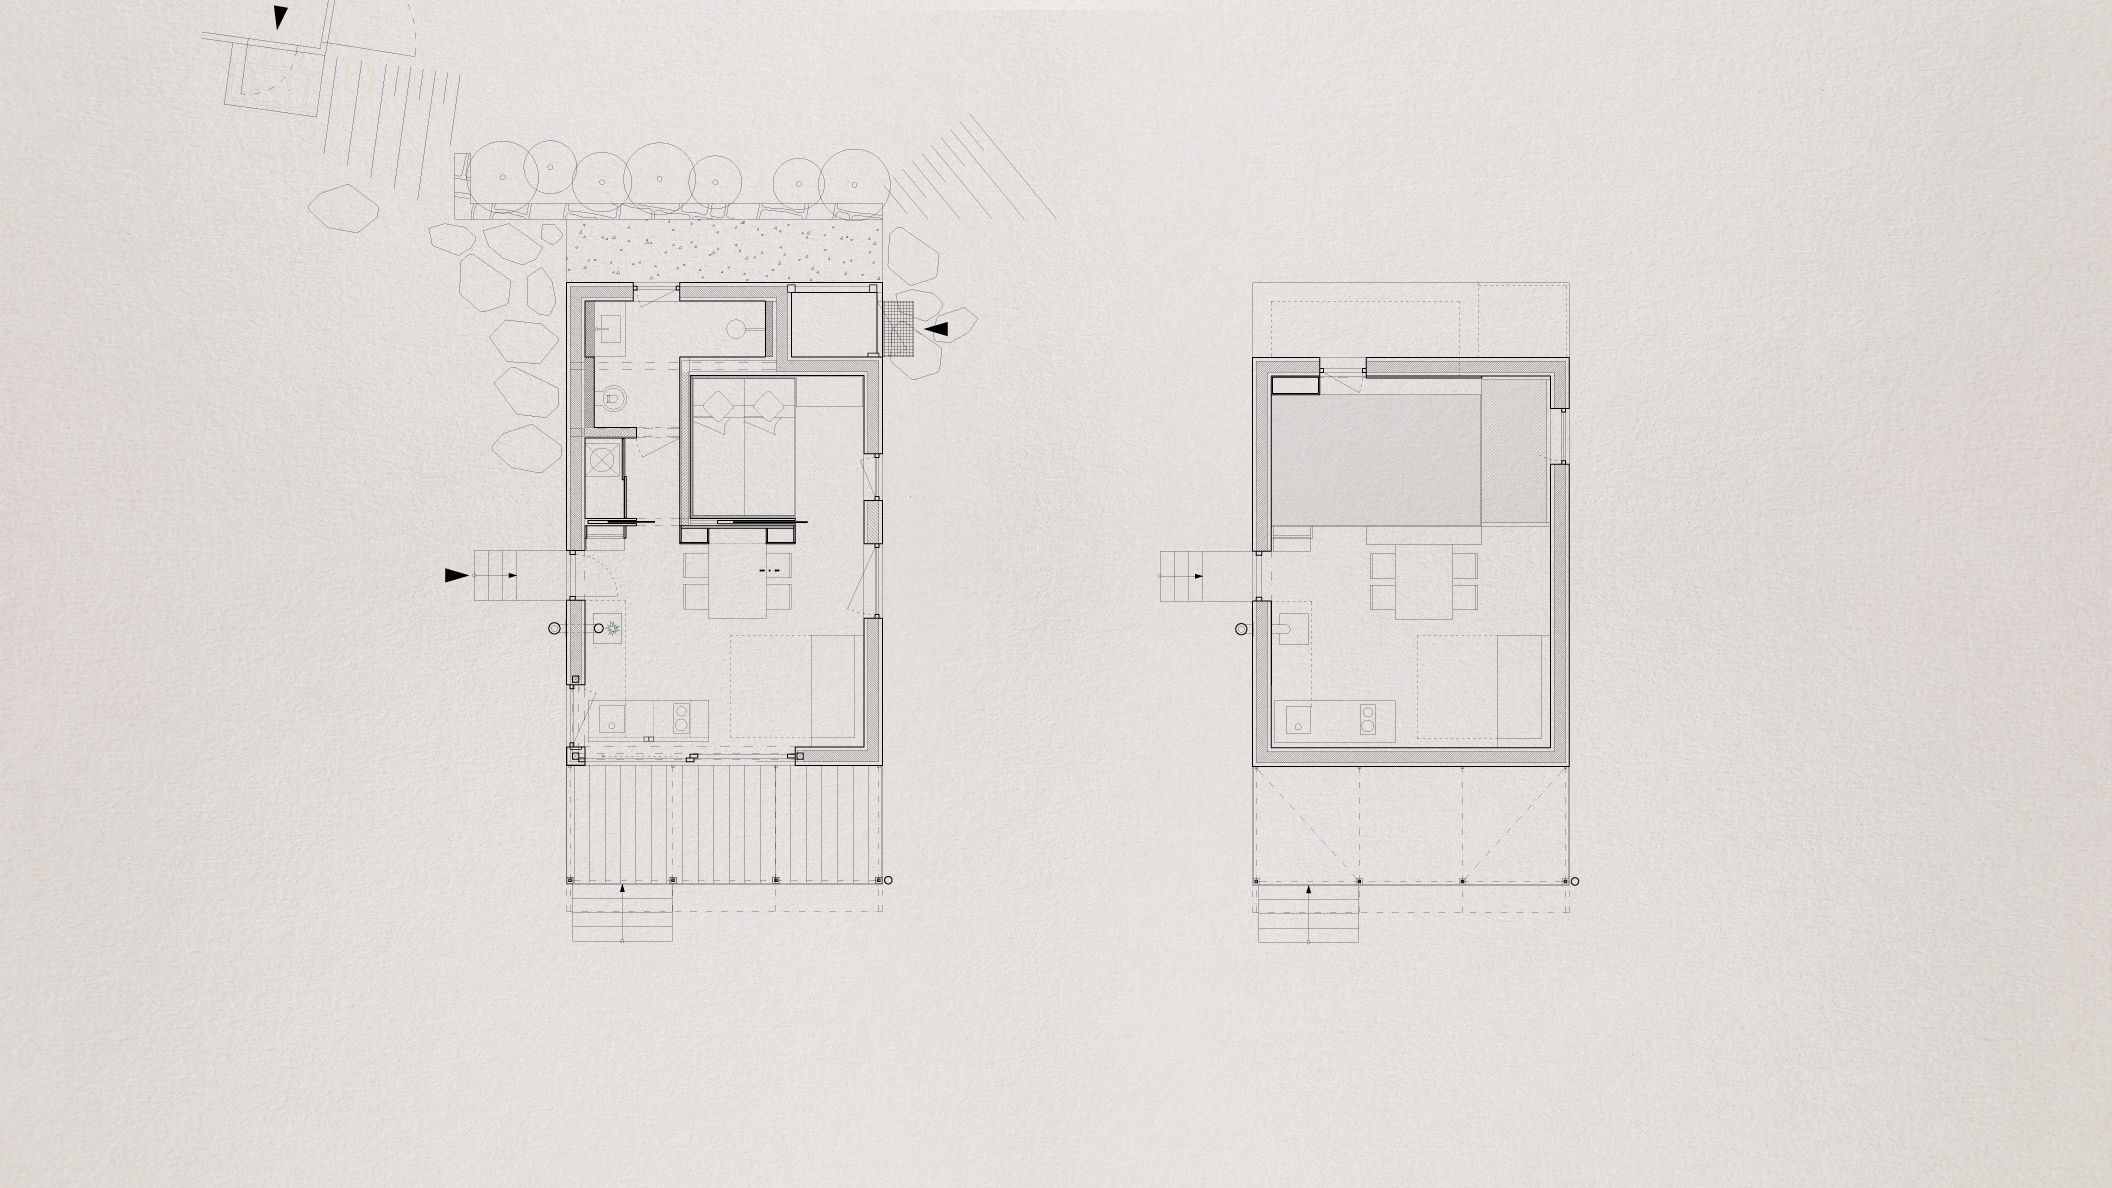 Plan of groundfloor and attic with sleeping storey